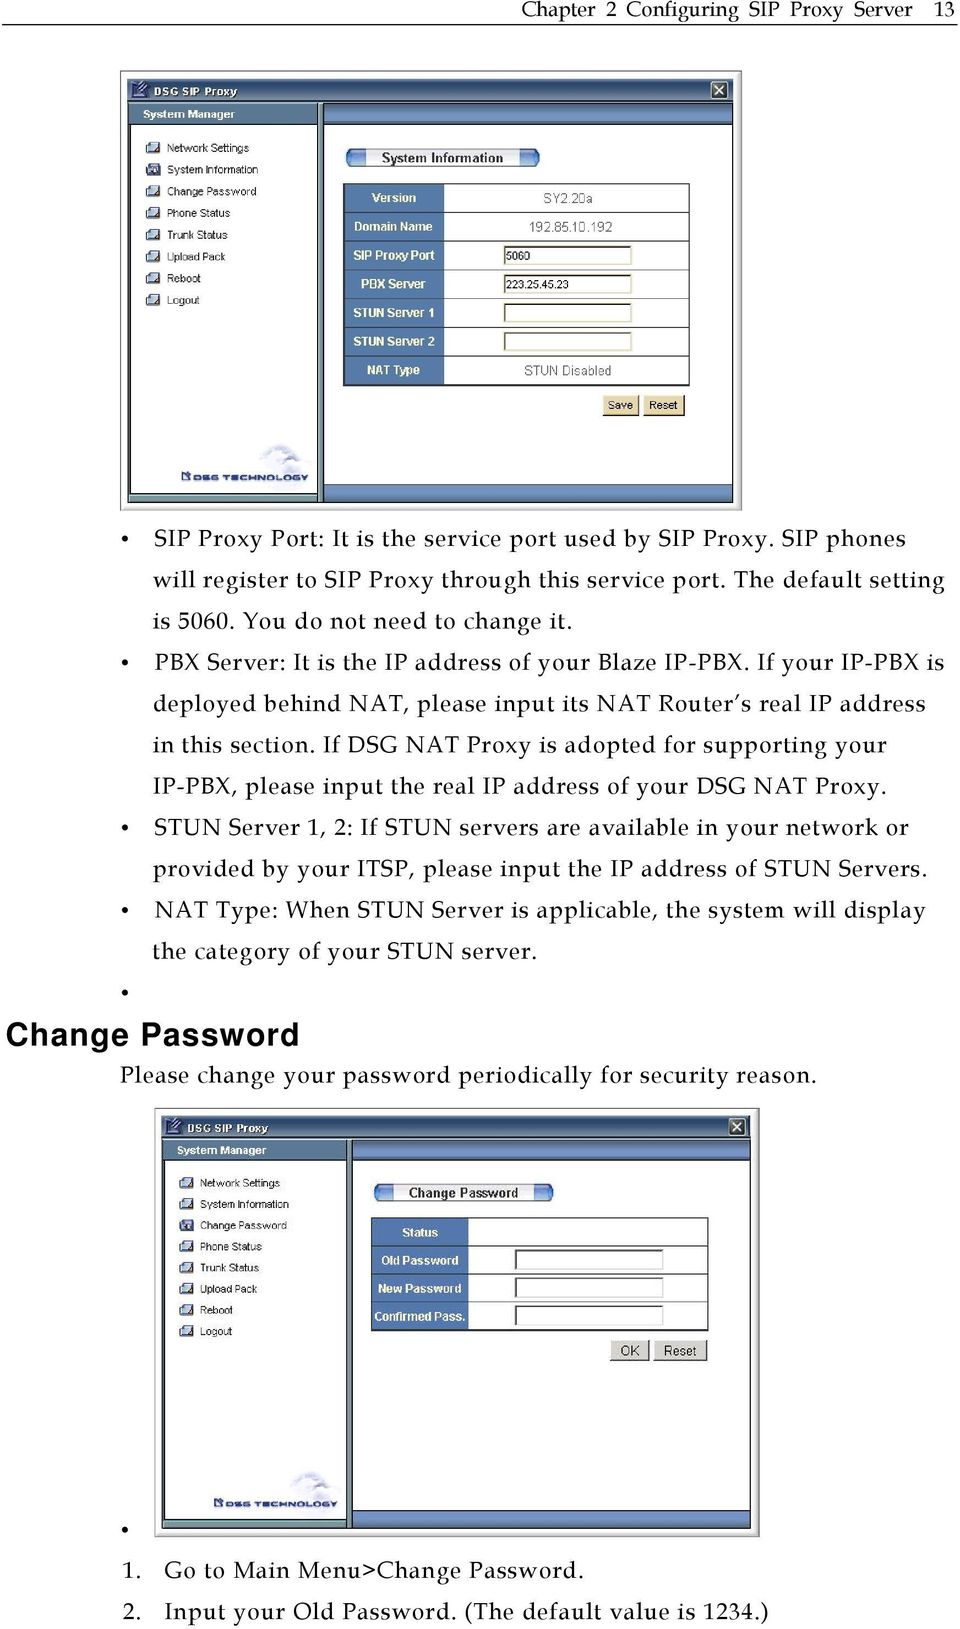 If DSG NAT Proxy is adopted for supporting your IP-PBX, please input the real IP address of your DSG NAT Proxy.